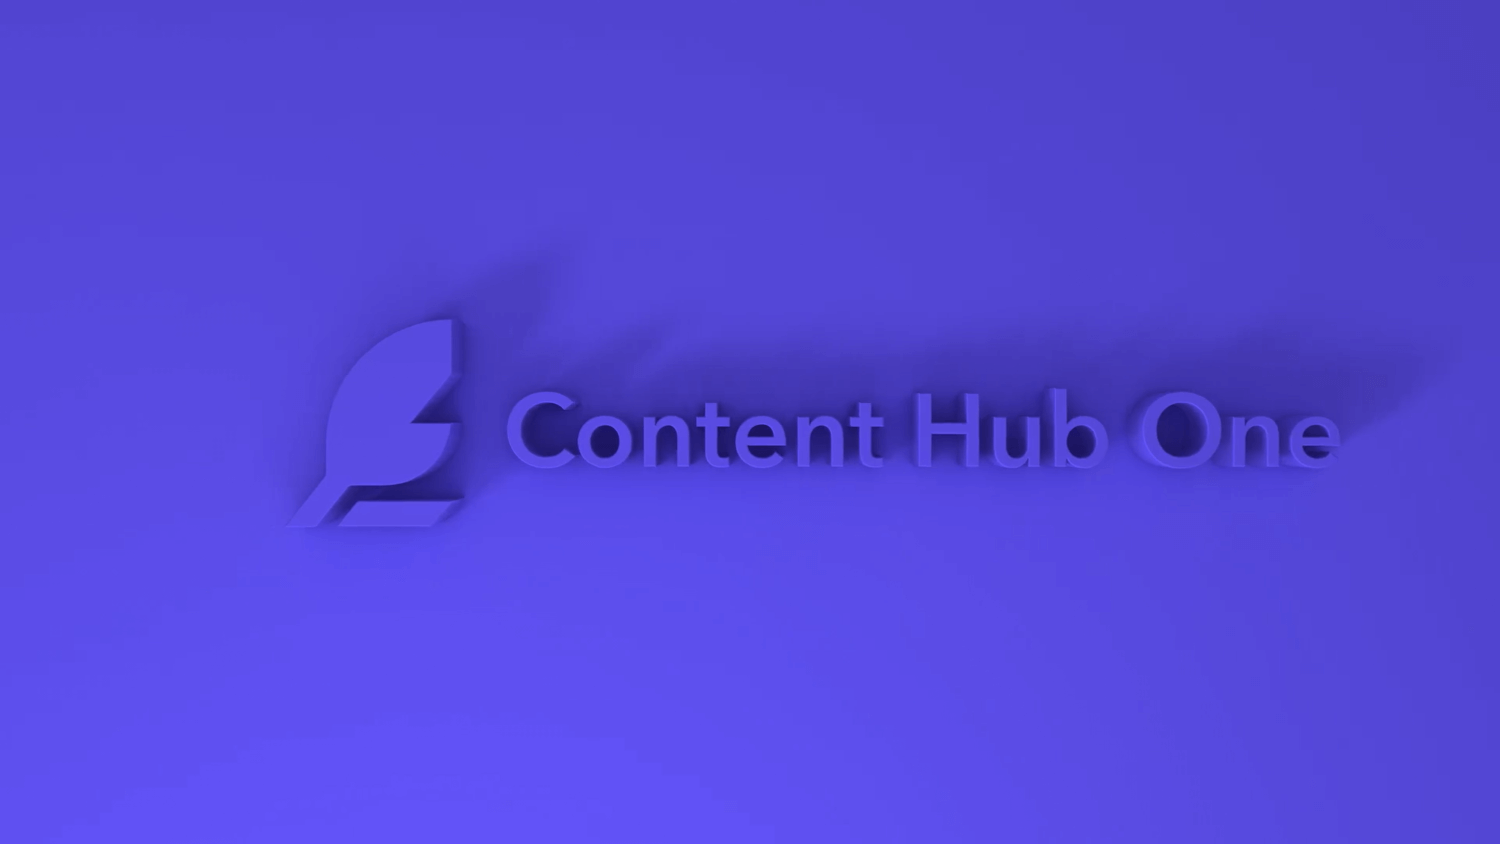 Content Hub One